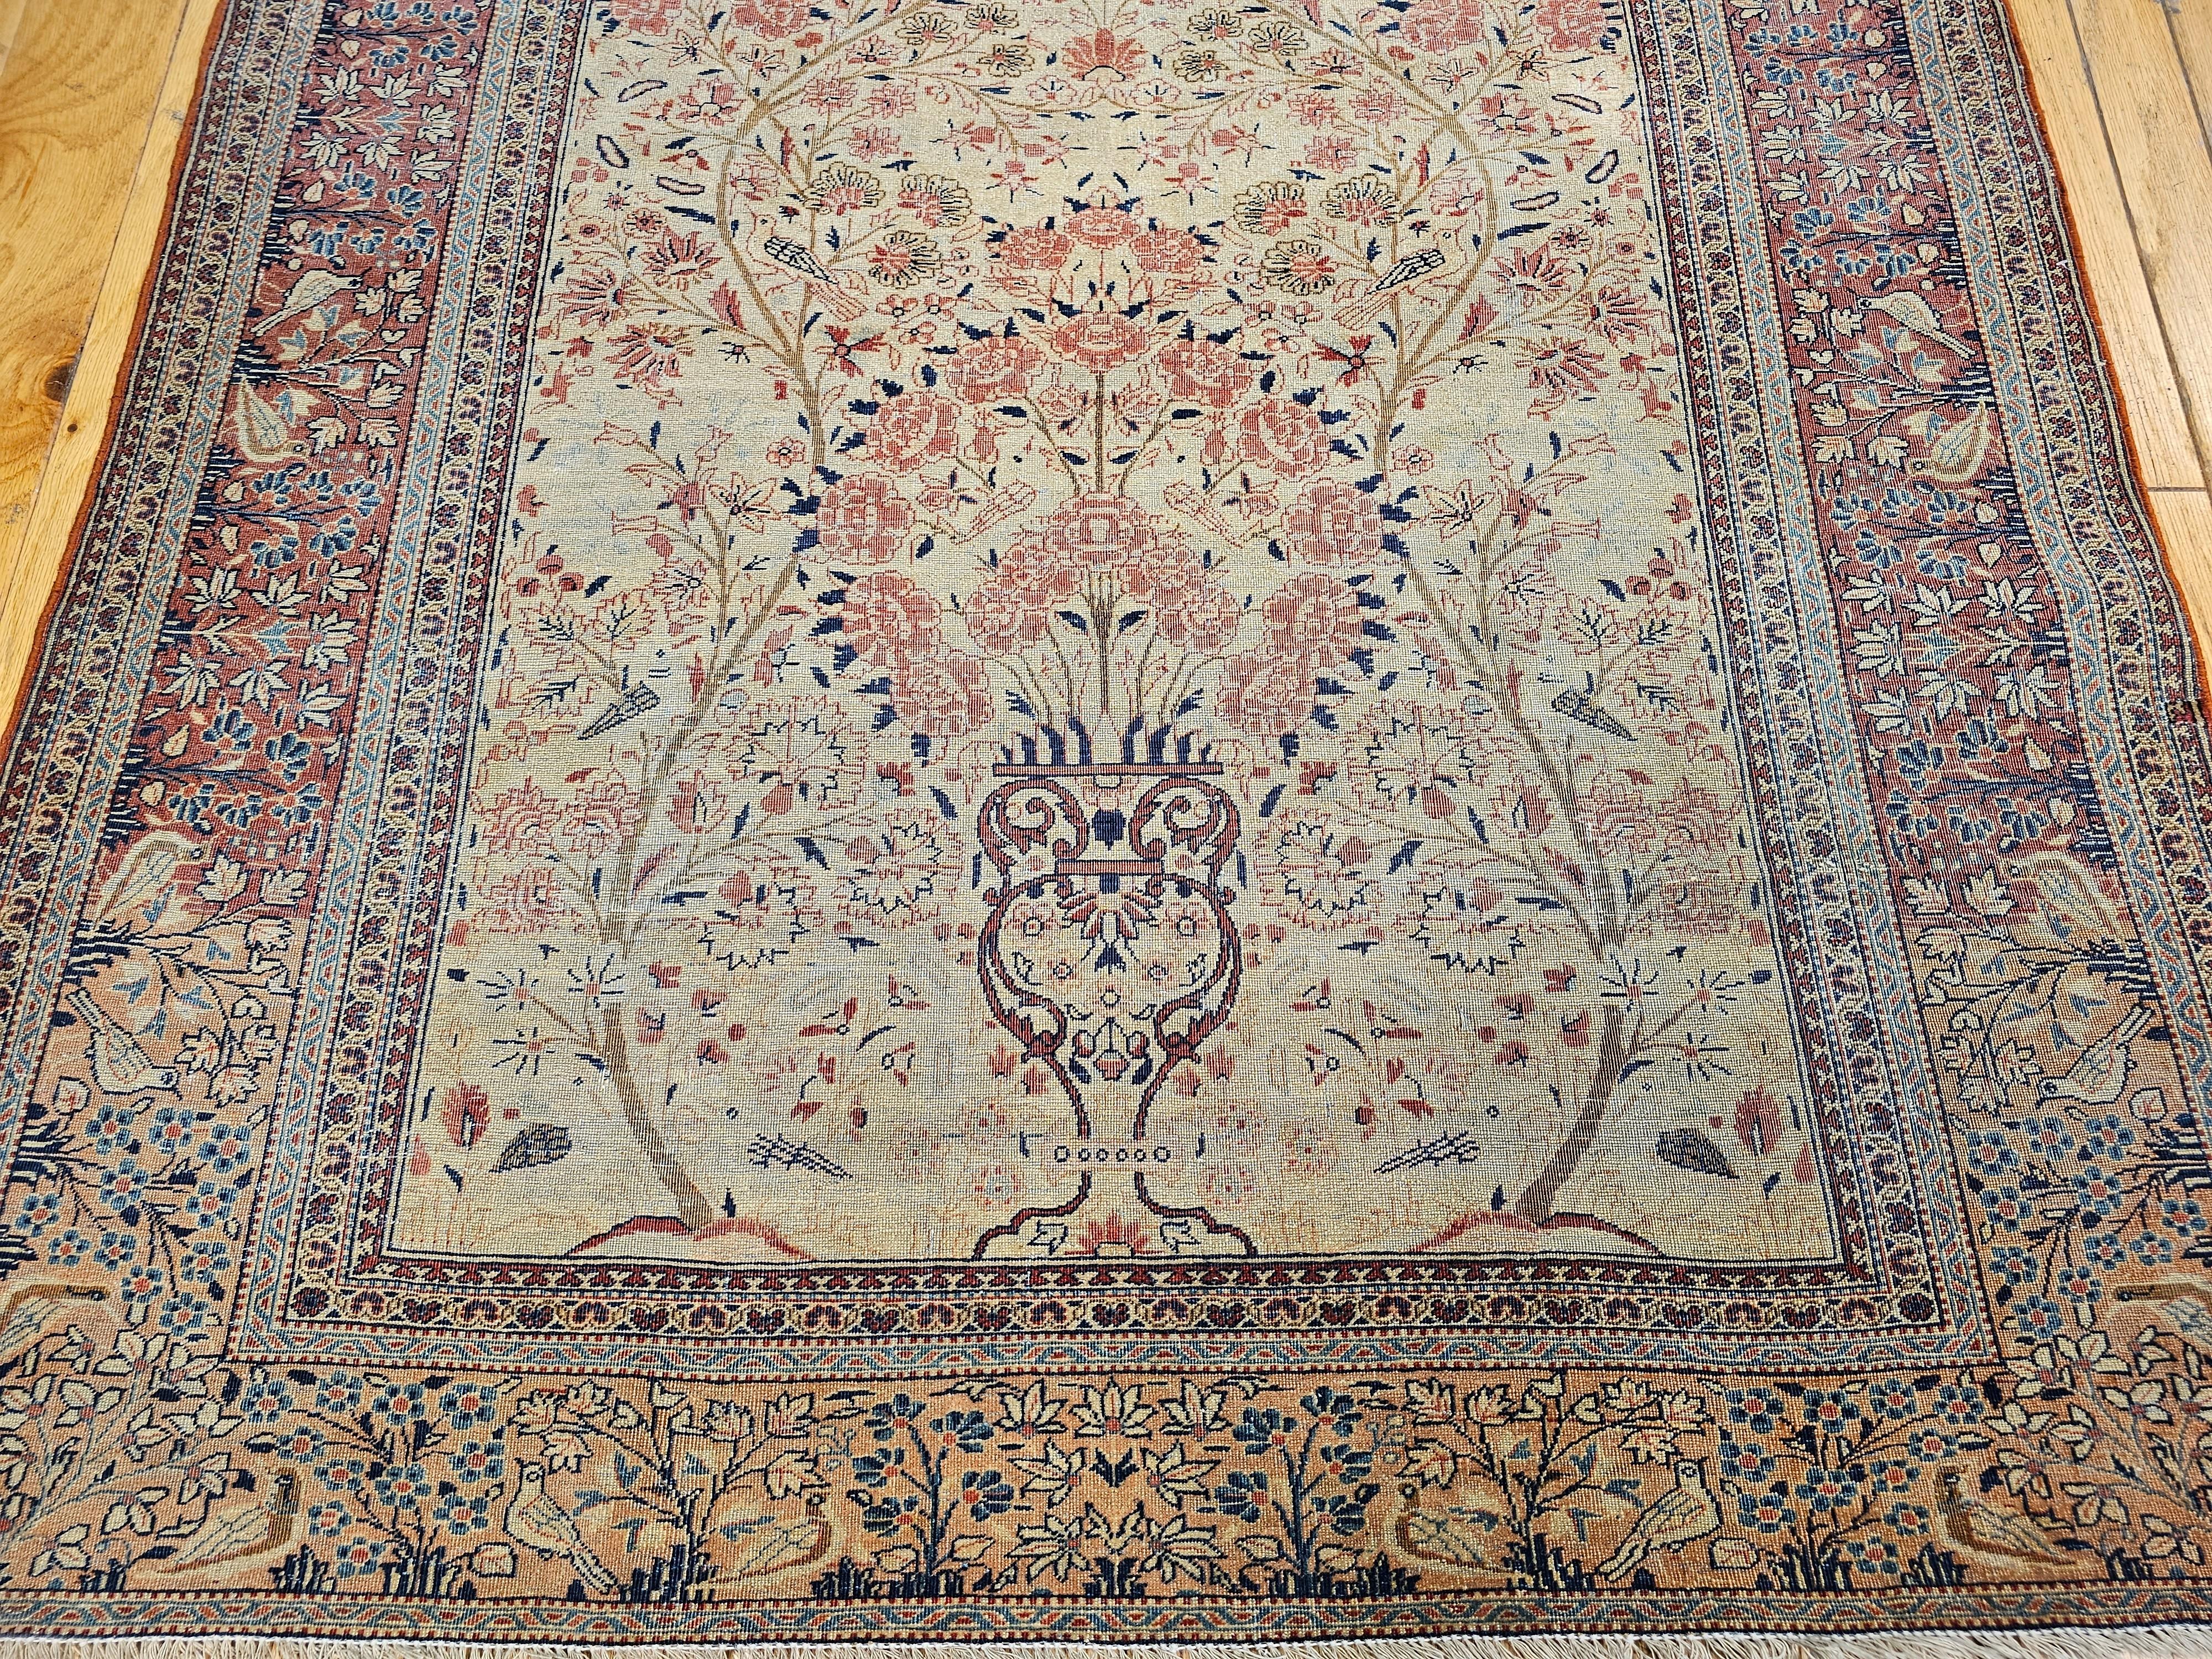 19th Century Persian Kashan “Tree of Life” Vase Rug in Ivory, Brick Red, Navy For Sale 6